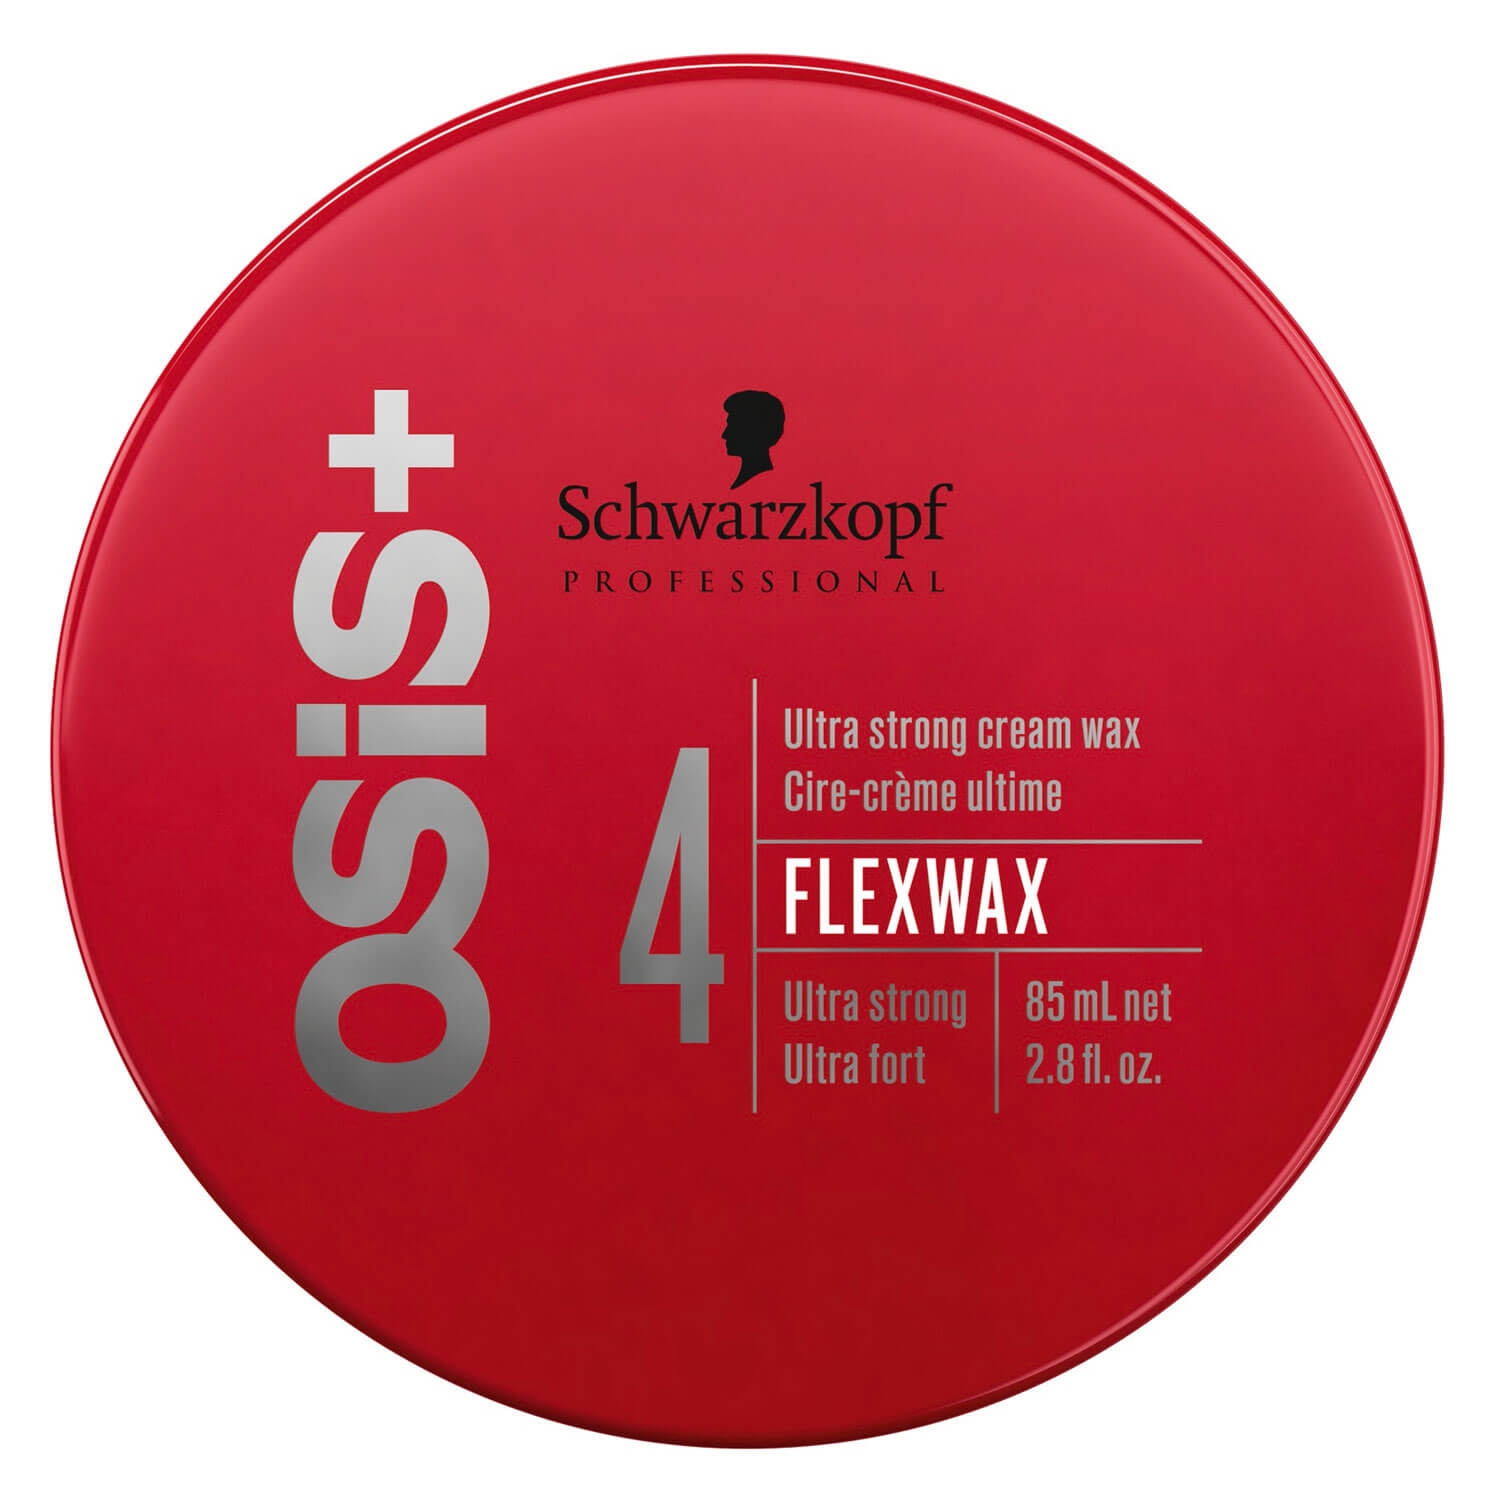 Product image from Osis - Flexwax